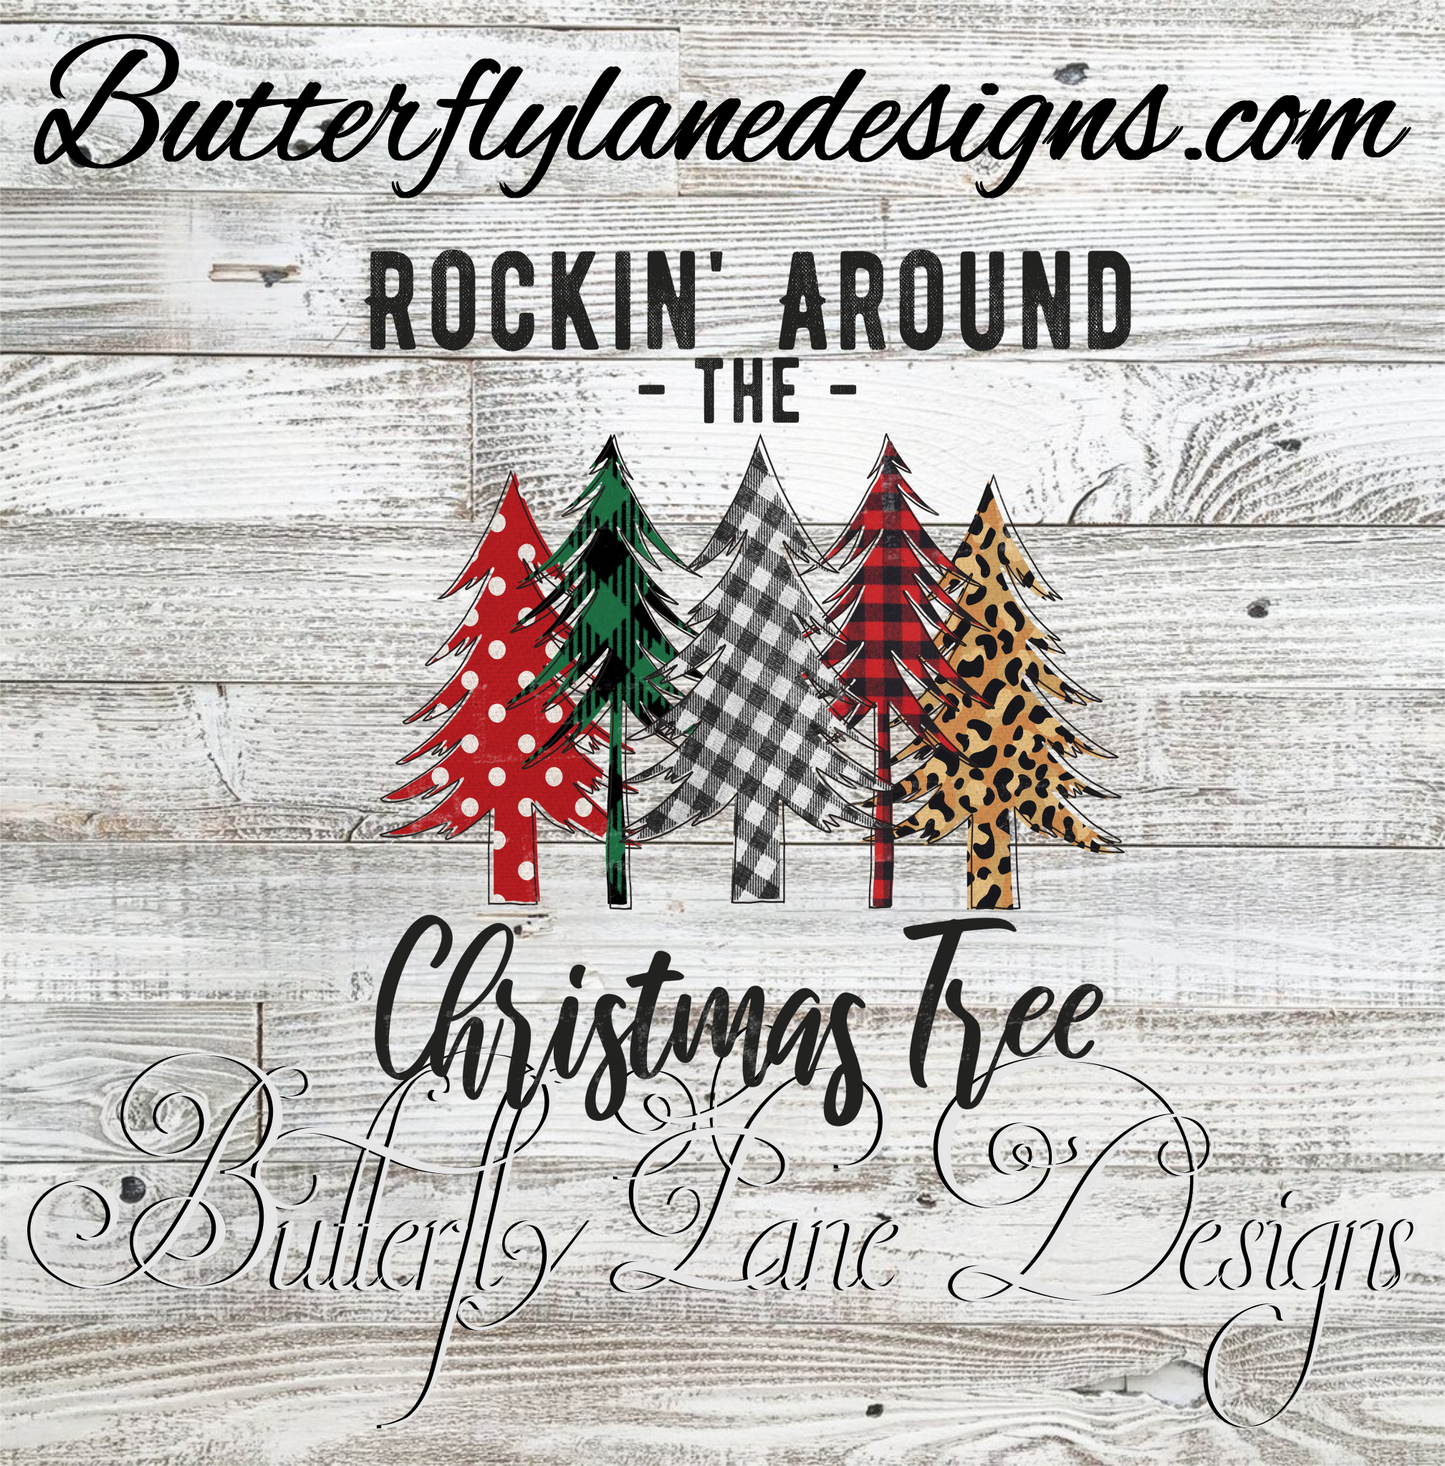 Rockin' Around the Christmas tree :: Clear Cast Decal